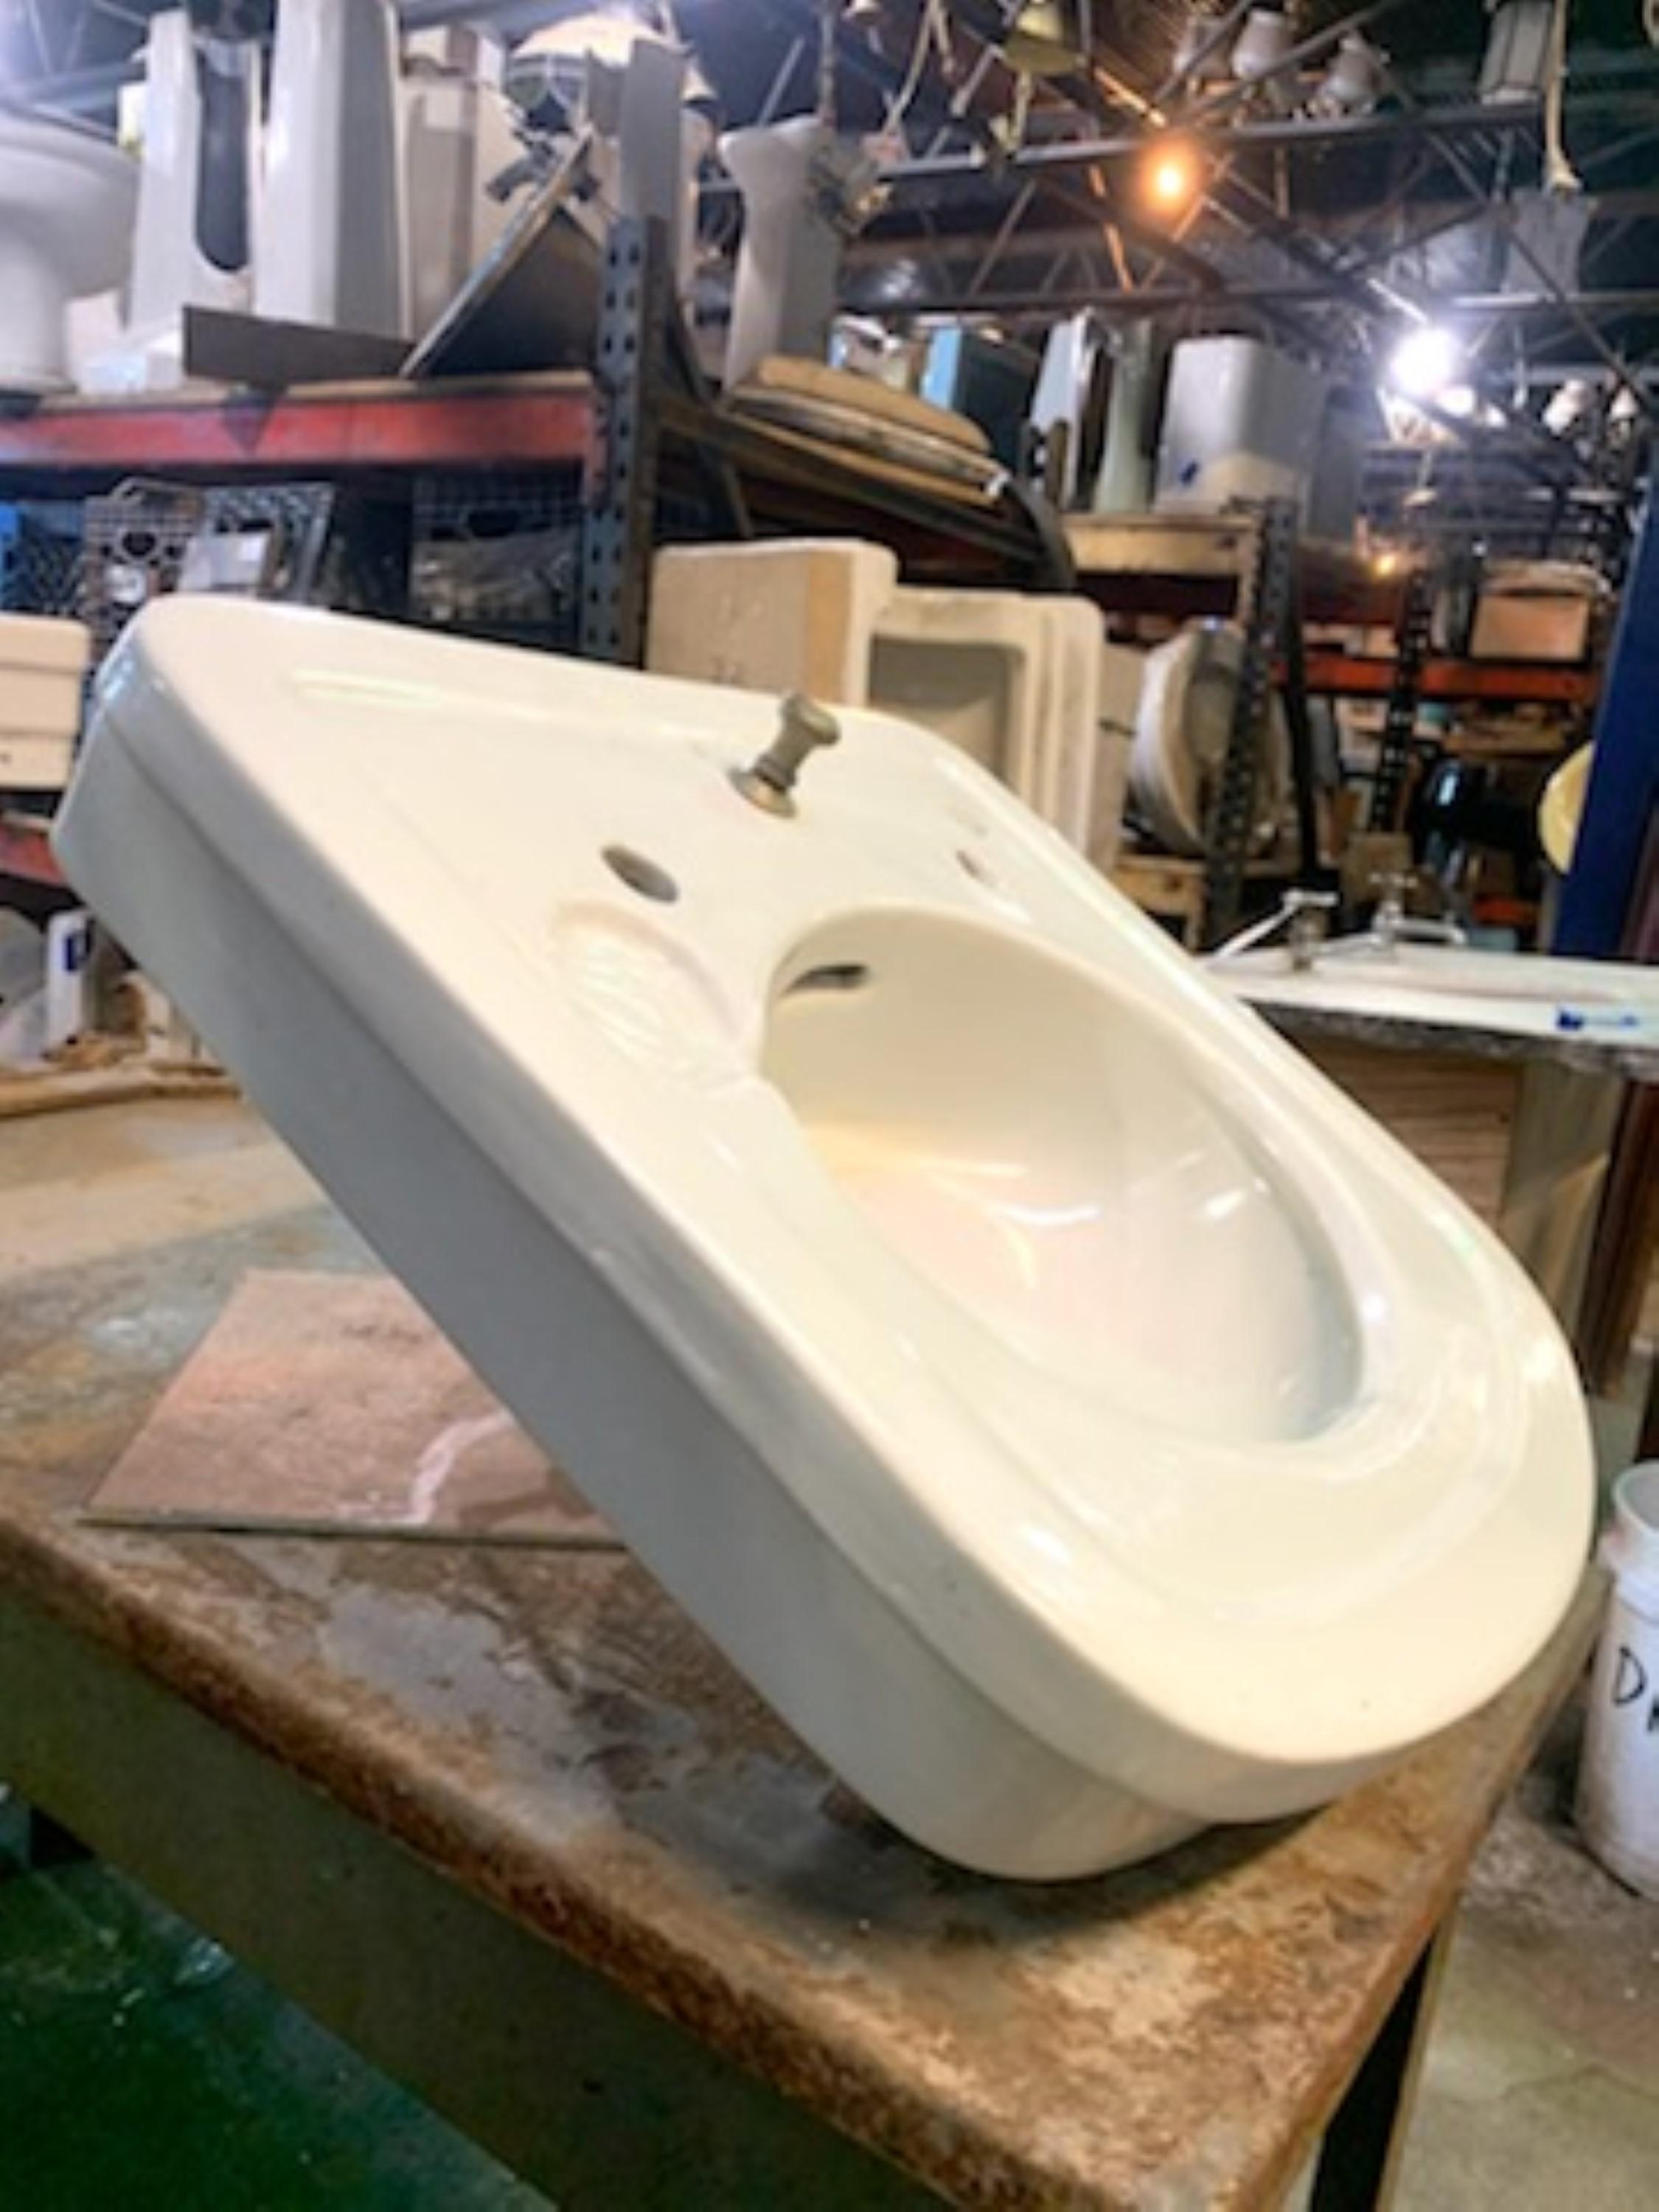 1902 Antique Bathroom Sink White Oval Bowl Wall Mount W Overflow Drain Soap Dish 8